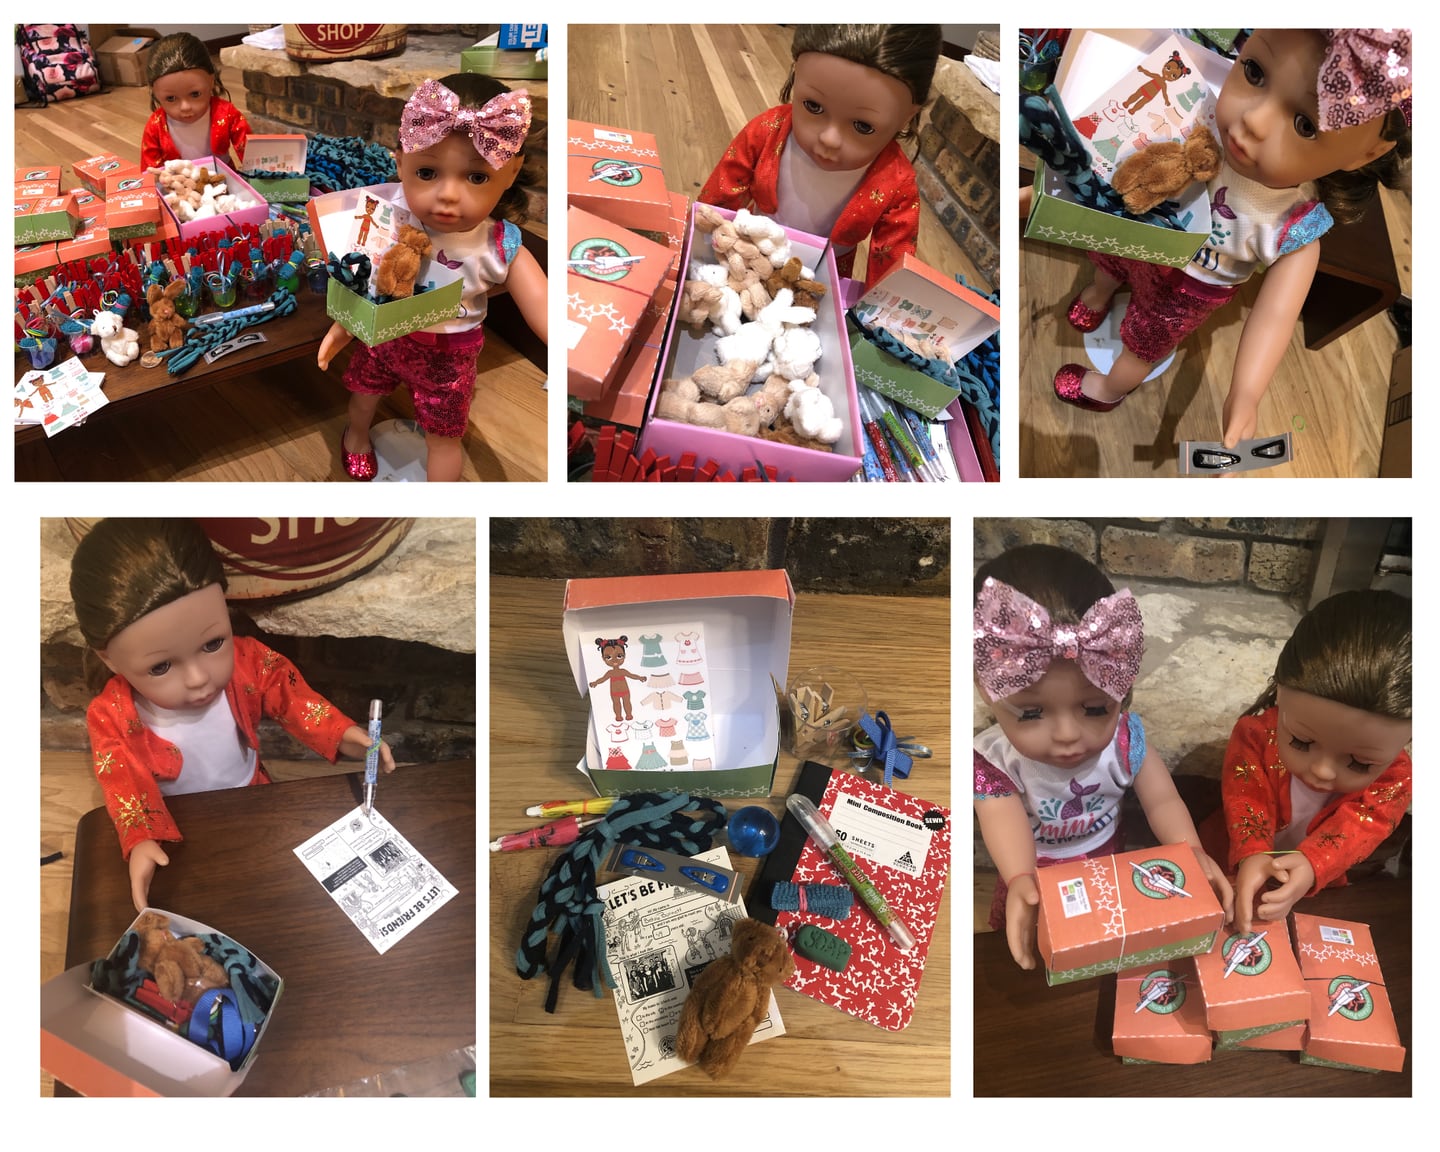 Betsy Burnett of Elwood assembled and personalized 24 dolls for Operation Christmas Child, which then sent the dolls to children in need. A longtime crafter, Burnett also found or made accessories for the dolls, too.